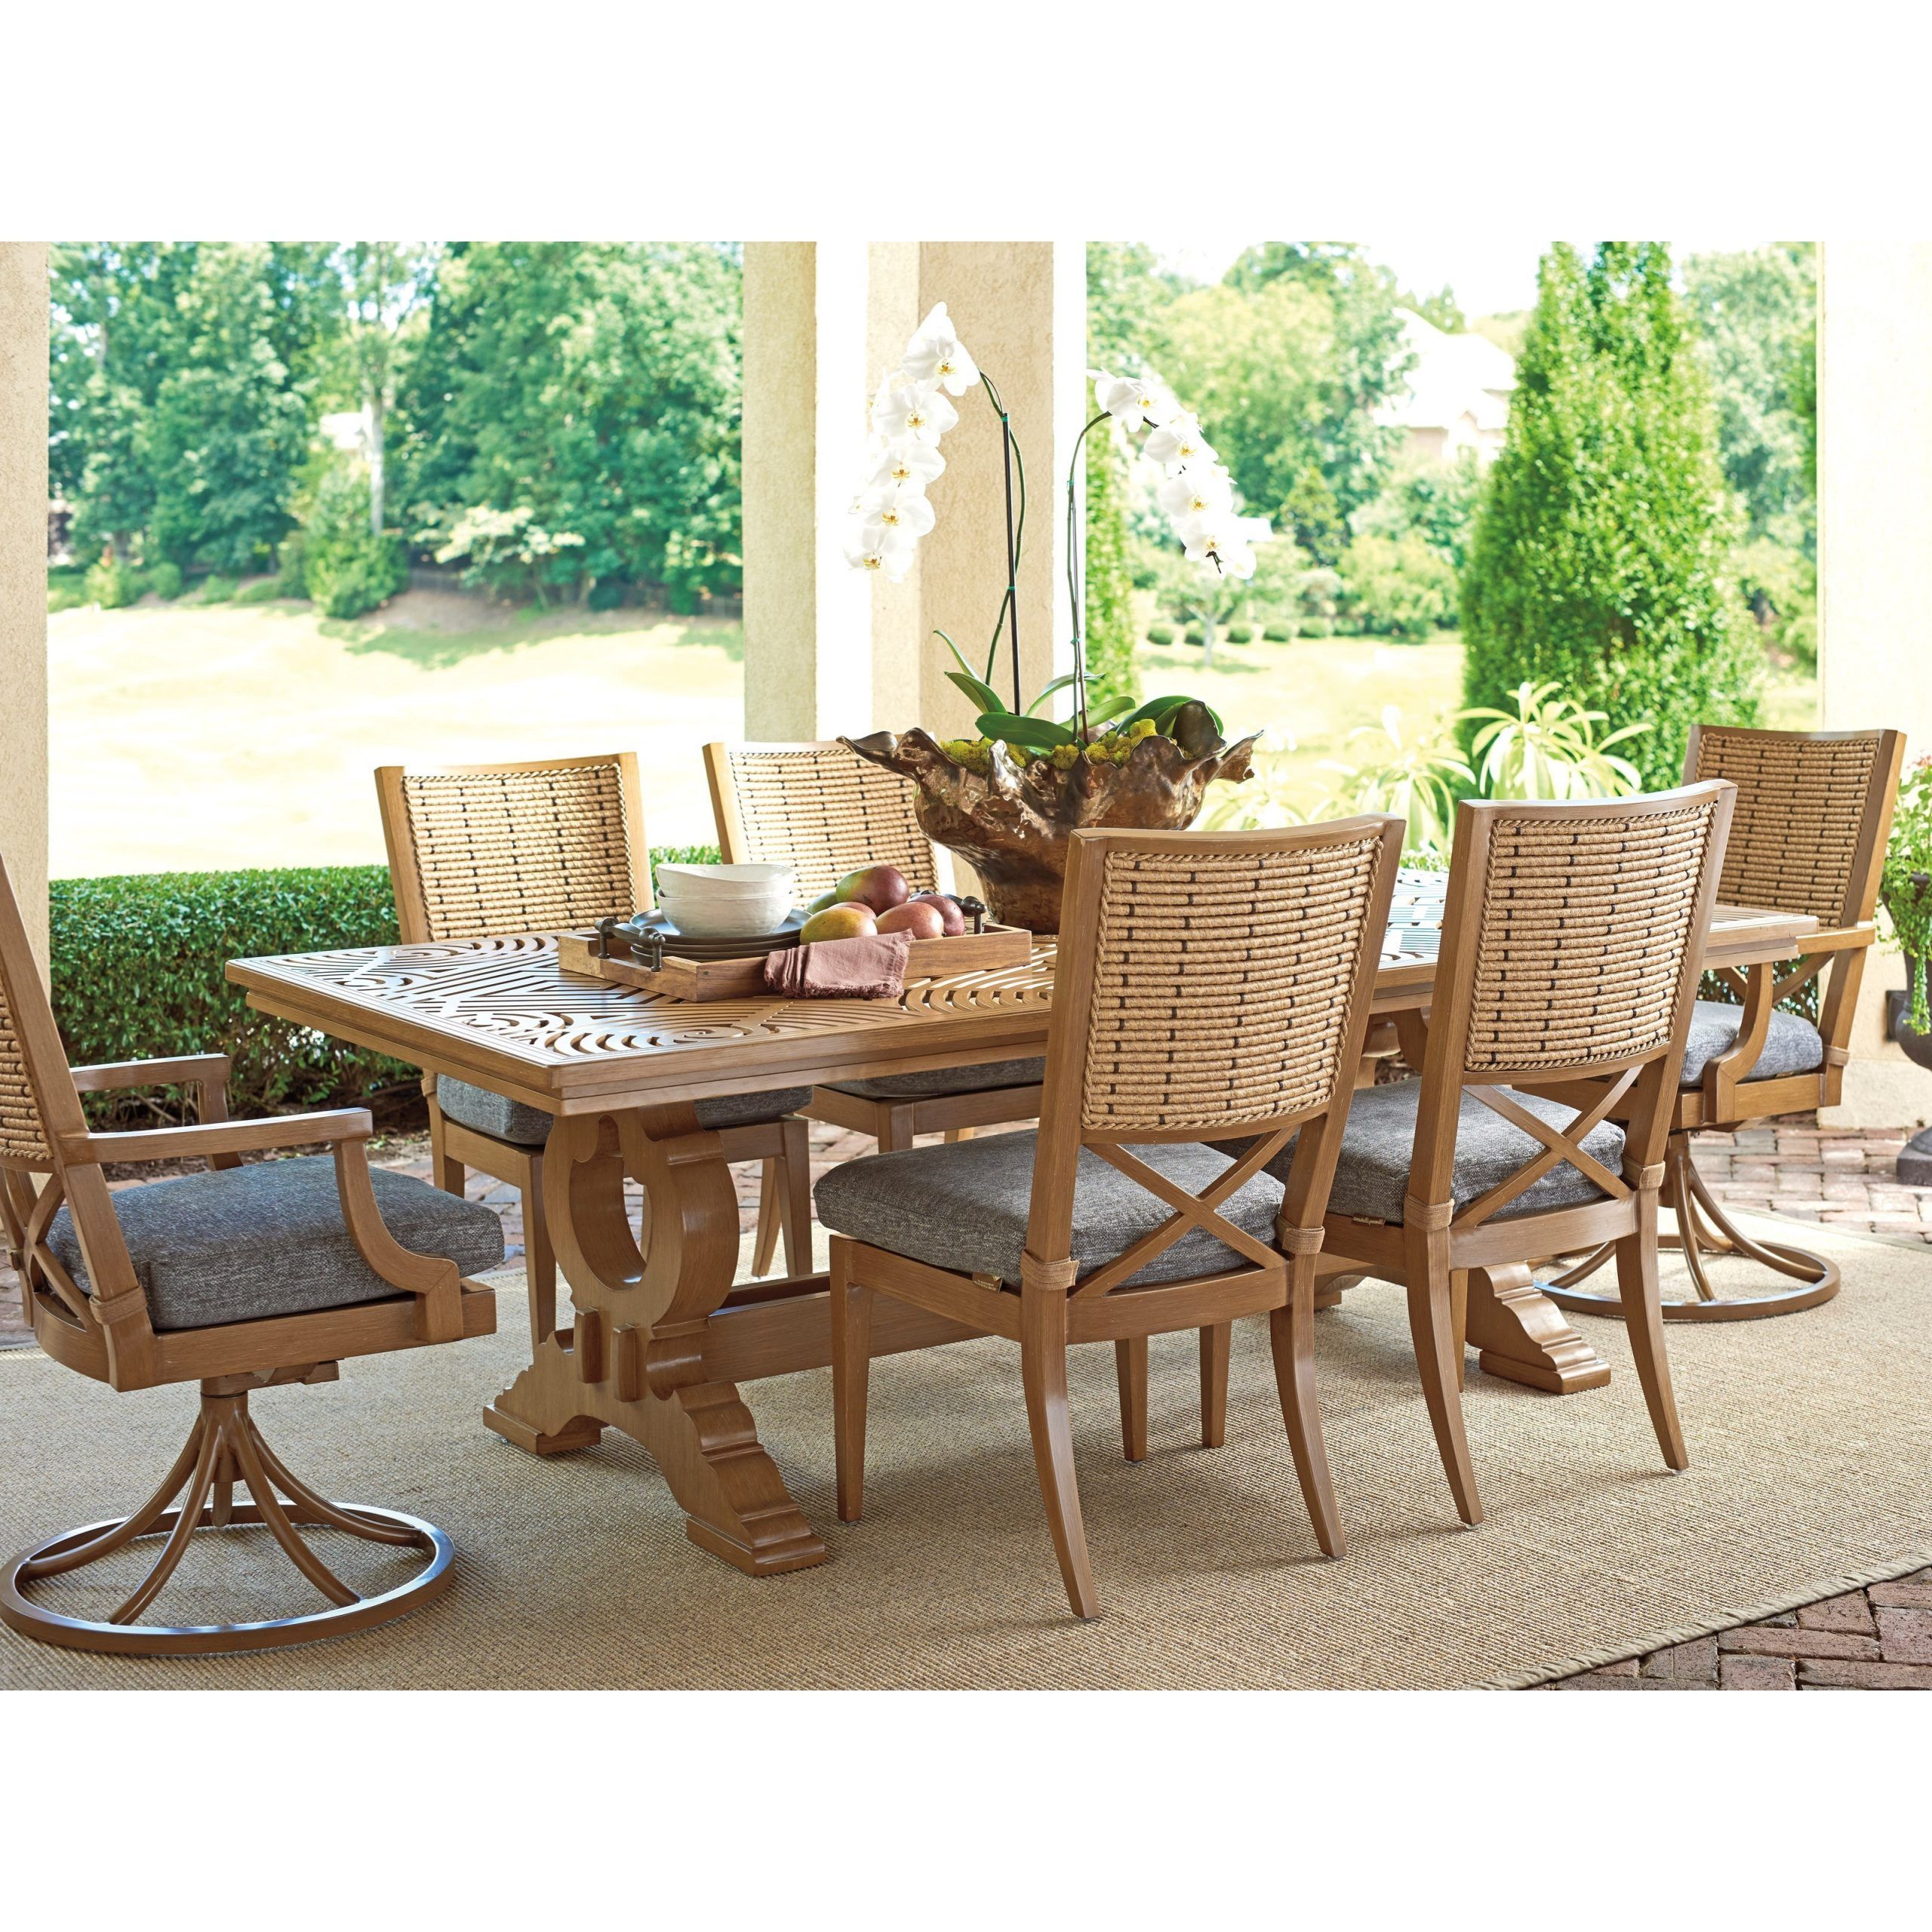 Tommy Bahama Outdoor Living Los Altos Valley View 7 Piece Outdoor Inside Best And Newest 7 Piece Rectangular Patio Dining Sets (View 7 of 15)